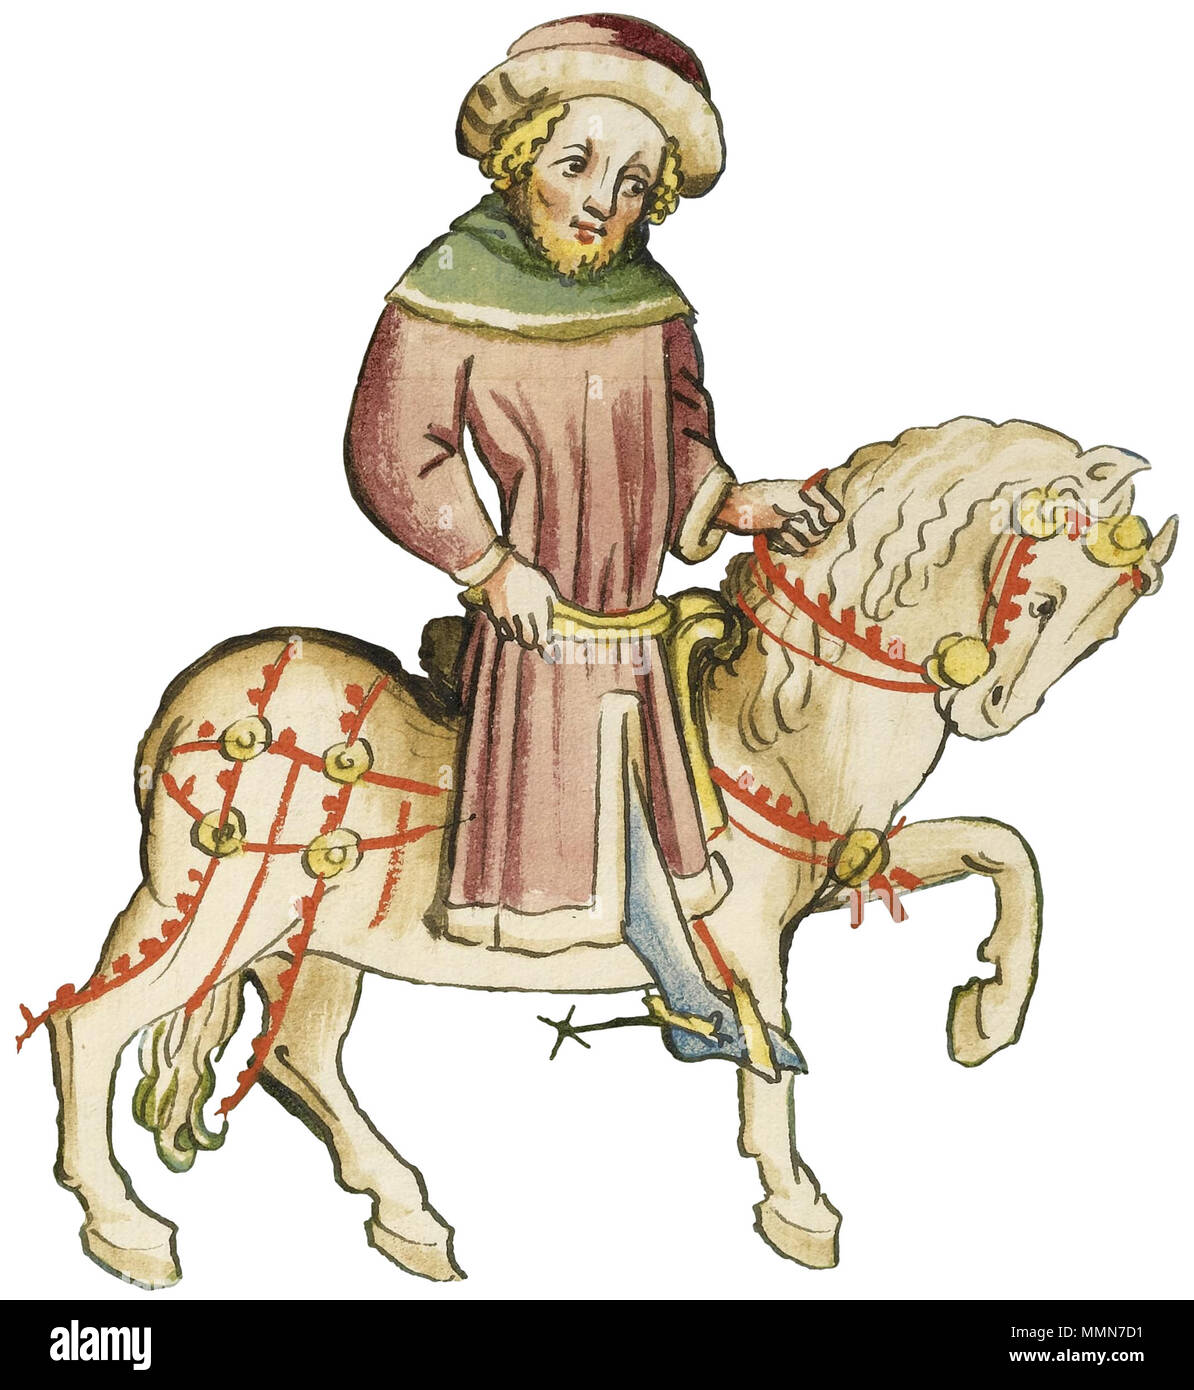 . Eberhard Windeck: Das Buch von Kaiser Sigismund (Handschrift bei Sotheby's 7.7.2009, siehe http://www.handschriftencensus.de/9134) [Not sure: folio 4v, the author Eberhardt Windeck on horseback riding away from his parents' house for the first time; OR folio 6r, the author again on horseback, having ridden down the Rhine, arriving at the entrance to the city of Cologne, surmounted by his arms] 103 Buch-kaiser-sigismund-L09740-26-lr-10 Stock Photo